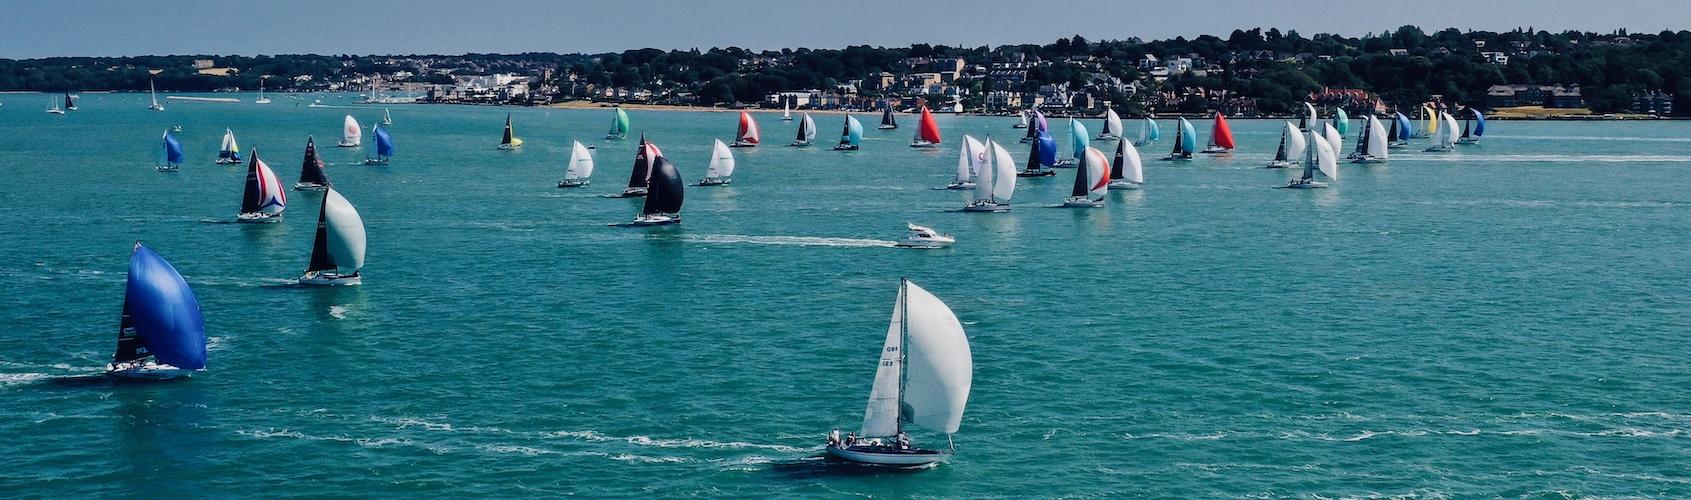 Organised by the Royal Ocean Racing Club since 1929, the Cowes Dinard St Malo Race is a true RORC Classic. © Paul Wyeth/RORC